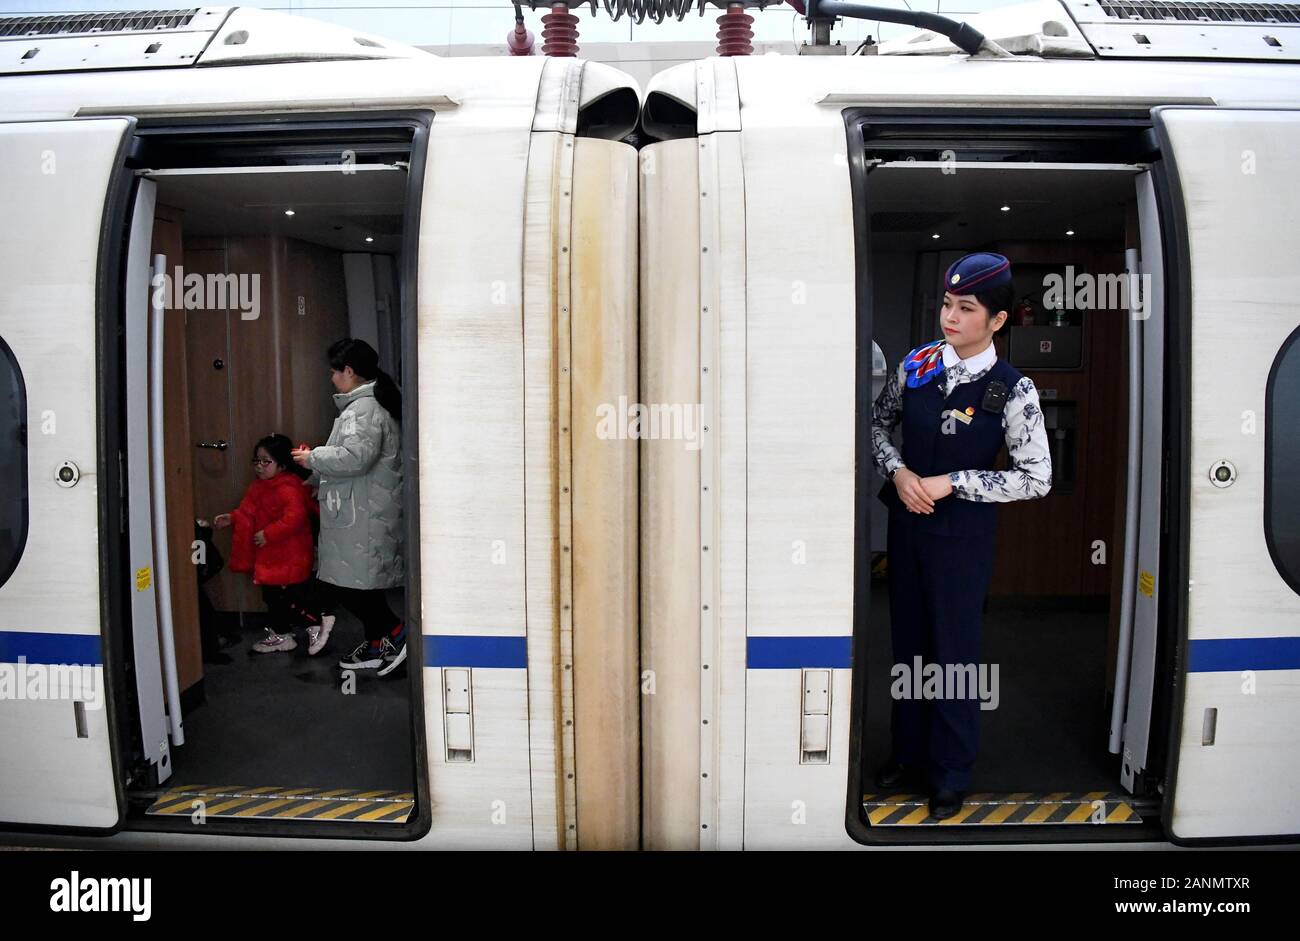 (200118) -- ZHENGZHOU, Jan. 18, 2020 (Xinhua) -- Jiang Yuanyue checks if all passengers finished boarding train G3105, Jan. 17, 2020. Jiang Yuanyuan, an attendant born in the new millenium, is getting ready for her first Spring Festival travel rush work as an attendant. To be an attendant on a high-speed train has always been Jiang's dream. After making her debut in the job, she tried hard to keep up with the fast pace and learn to get along with various passengers. As she tried and persisted, Jiang has grown into a professional and proficient attendant. As the job requires Jiang to work Stock Photo